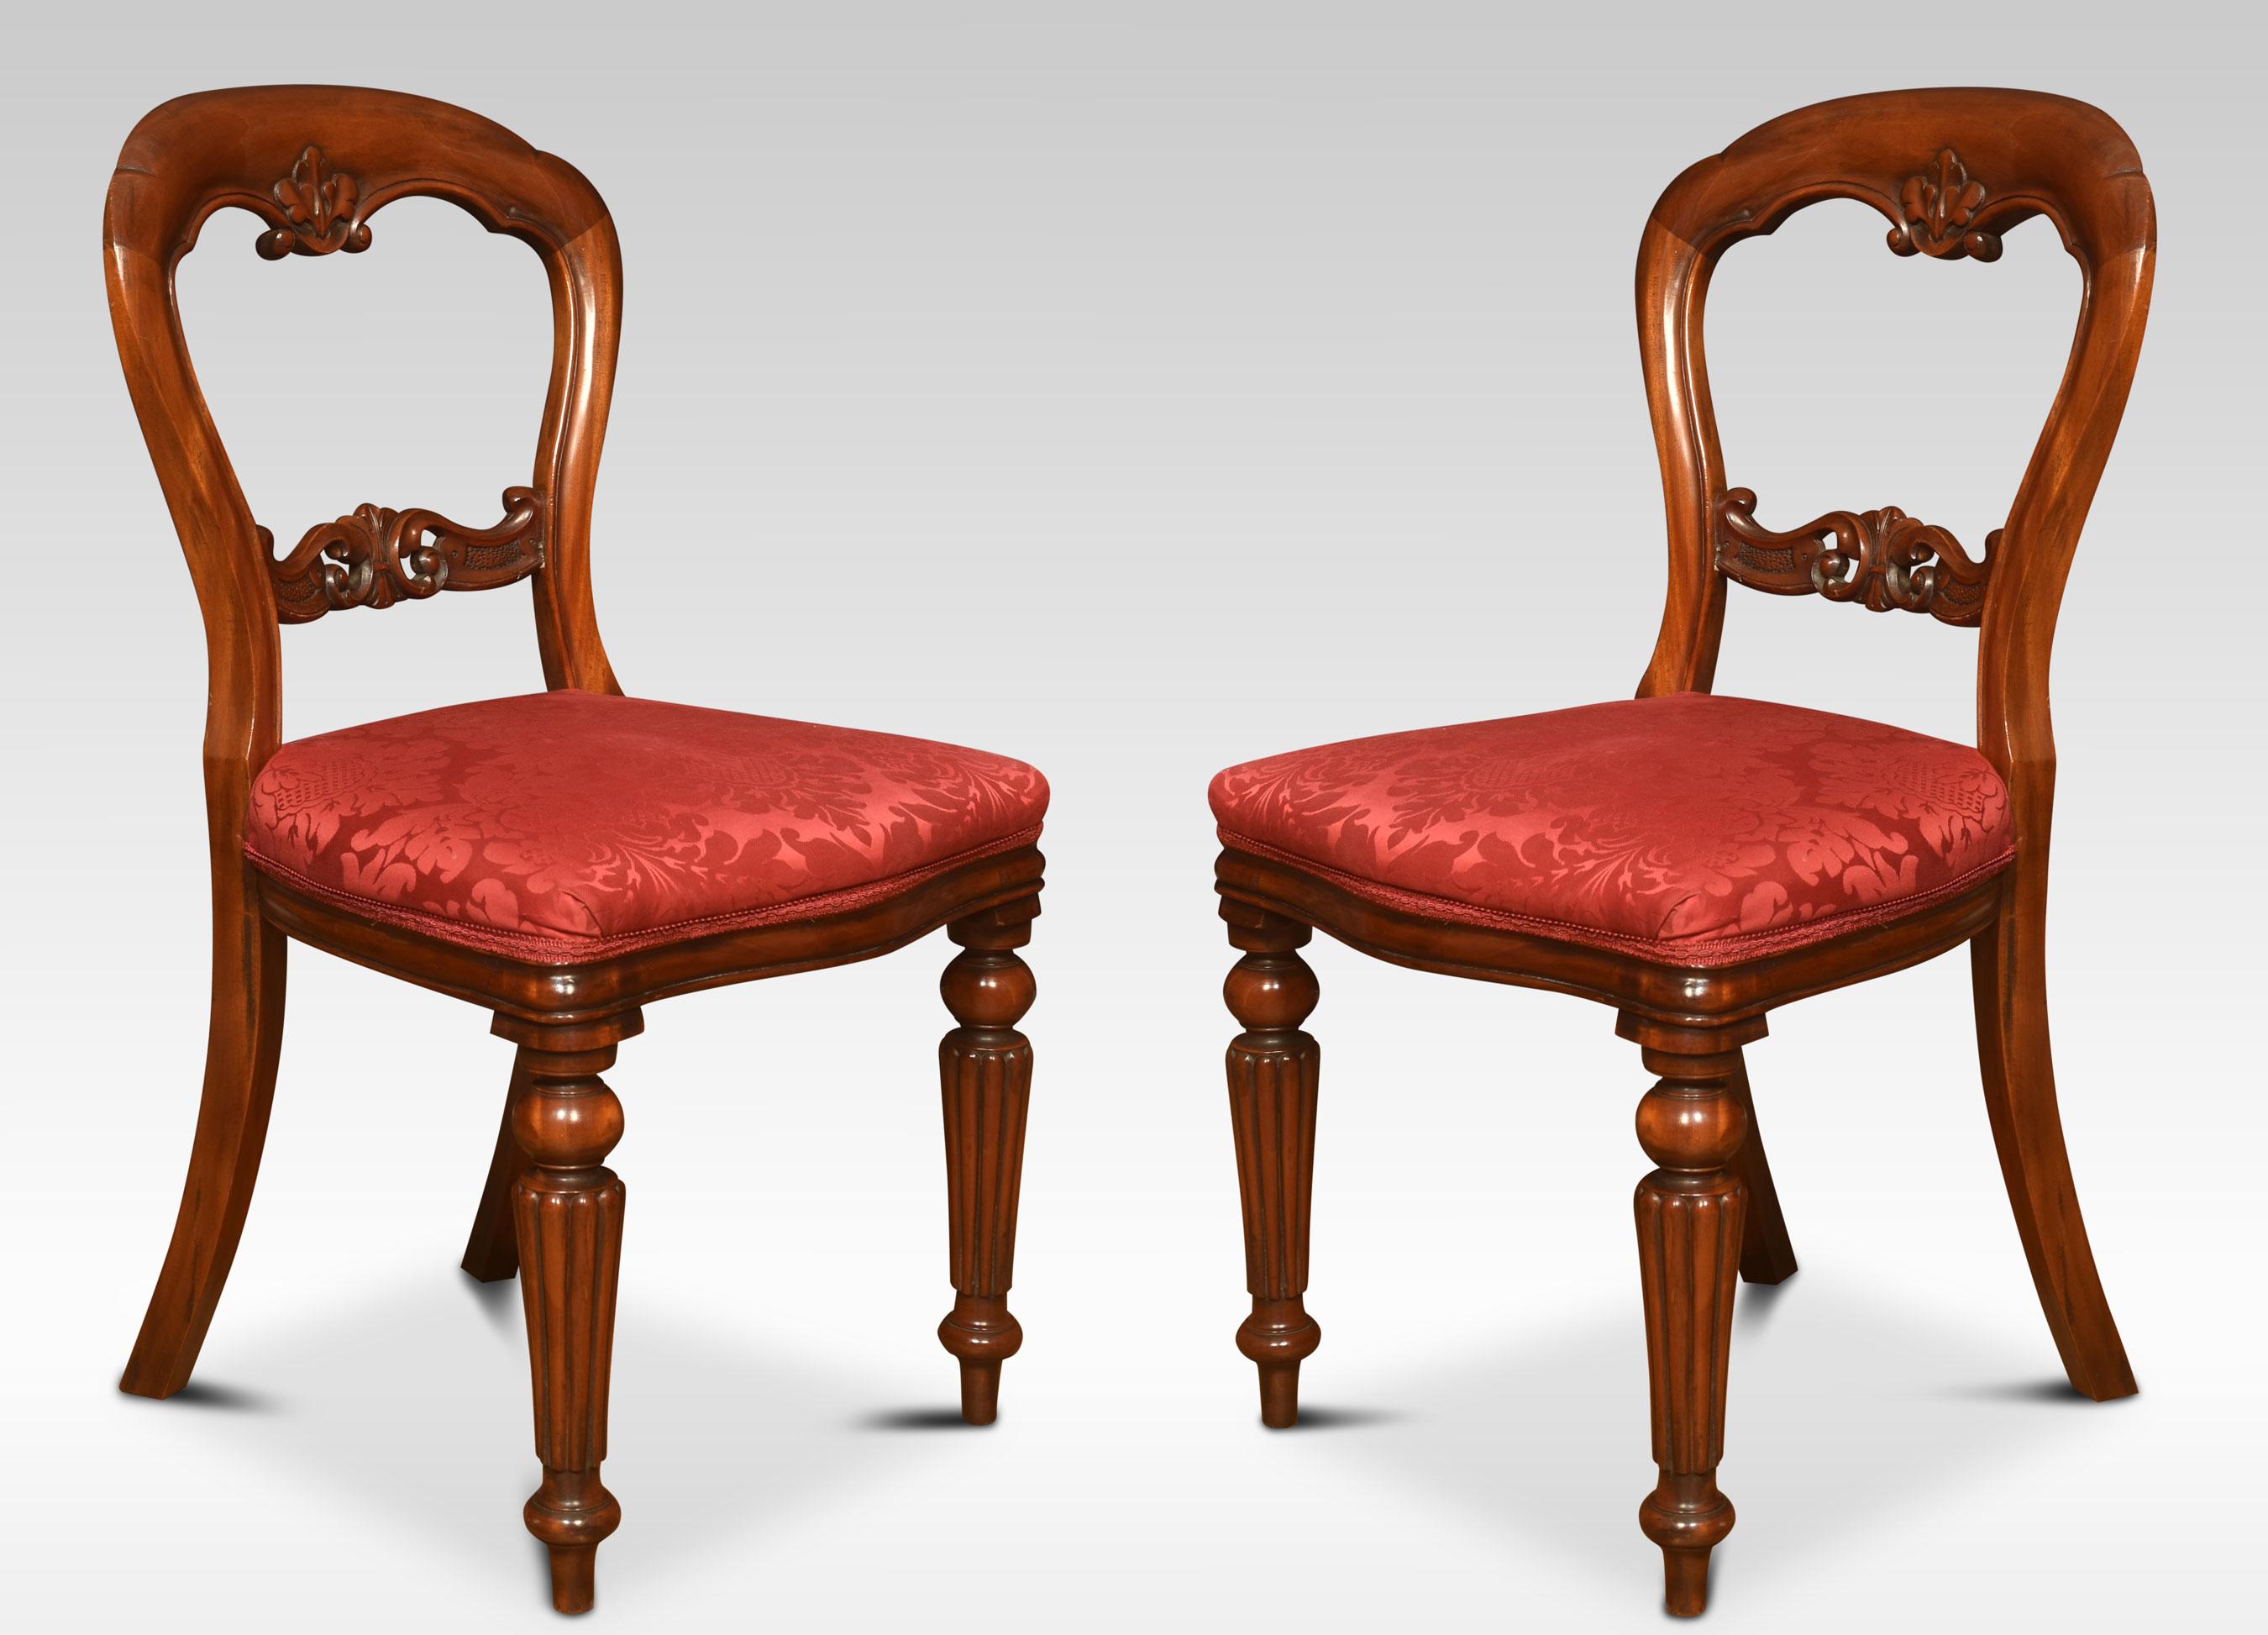 Set of ten mahogany dining chairs the carved shaped backrests to the overstuffed upholstered seats and serpentine front rail. Raised on turned reeded supports.
Dimensions
Height 35 Inches height to seat 19 Inches
Width 19 Inches
Depth 21.5